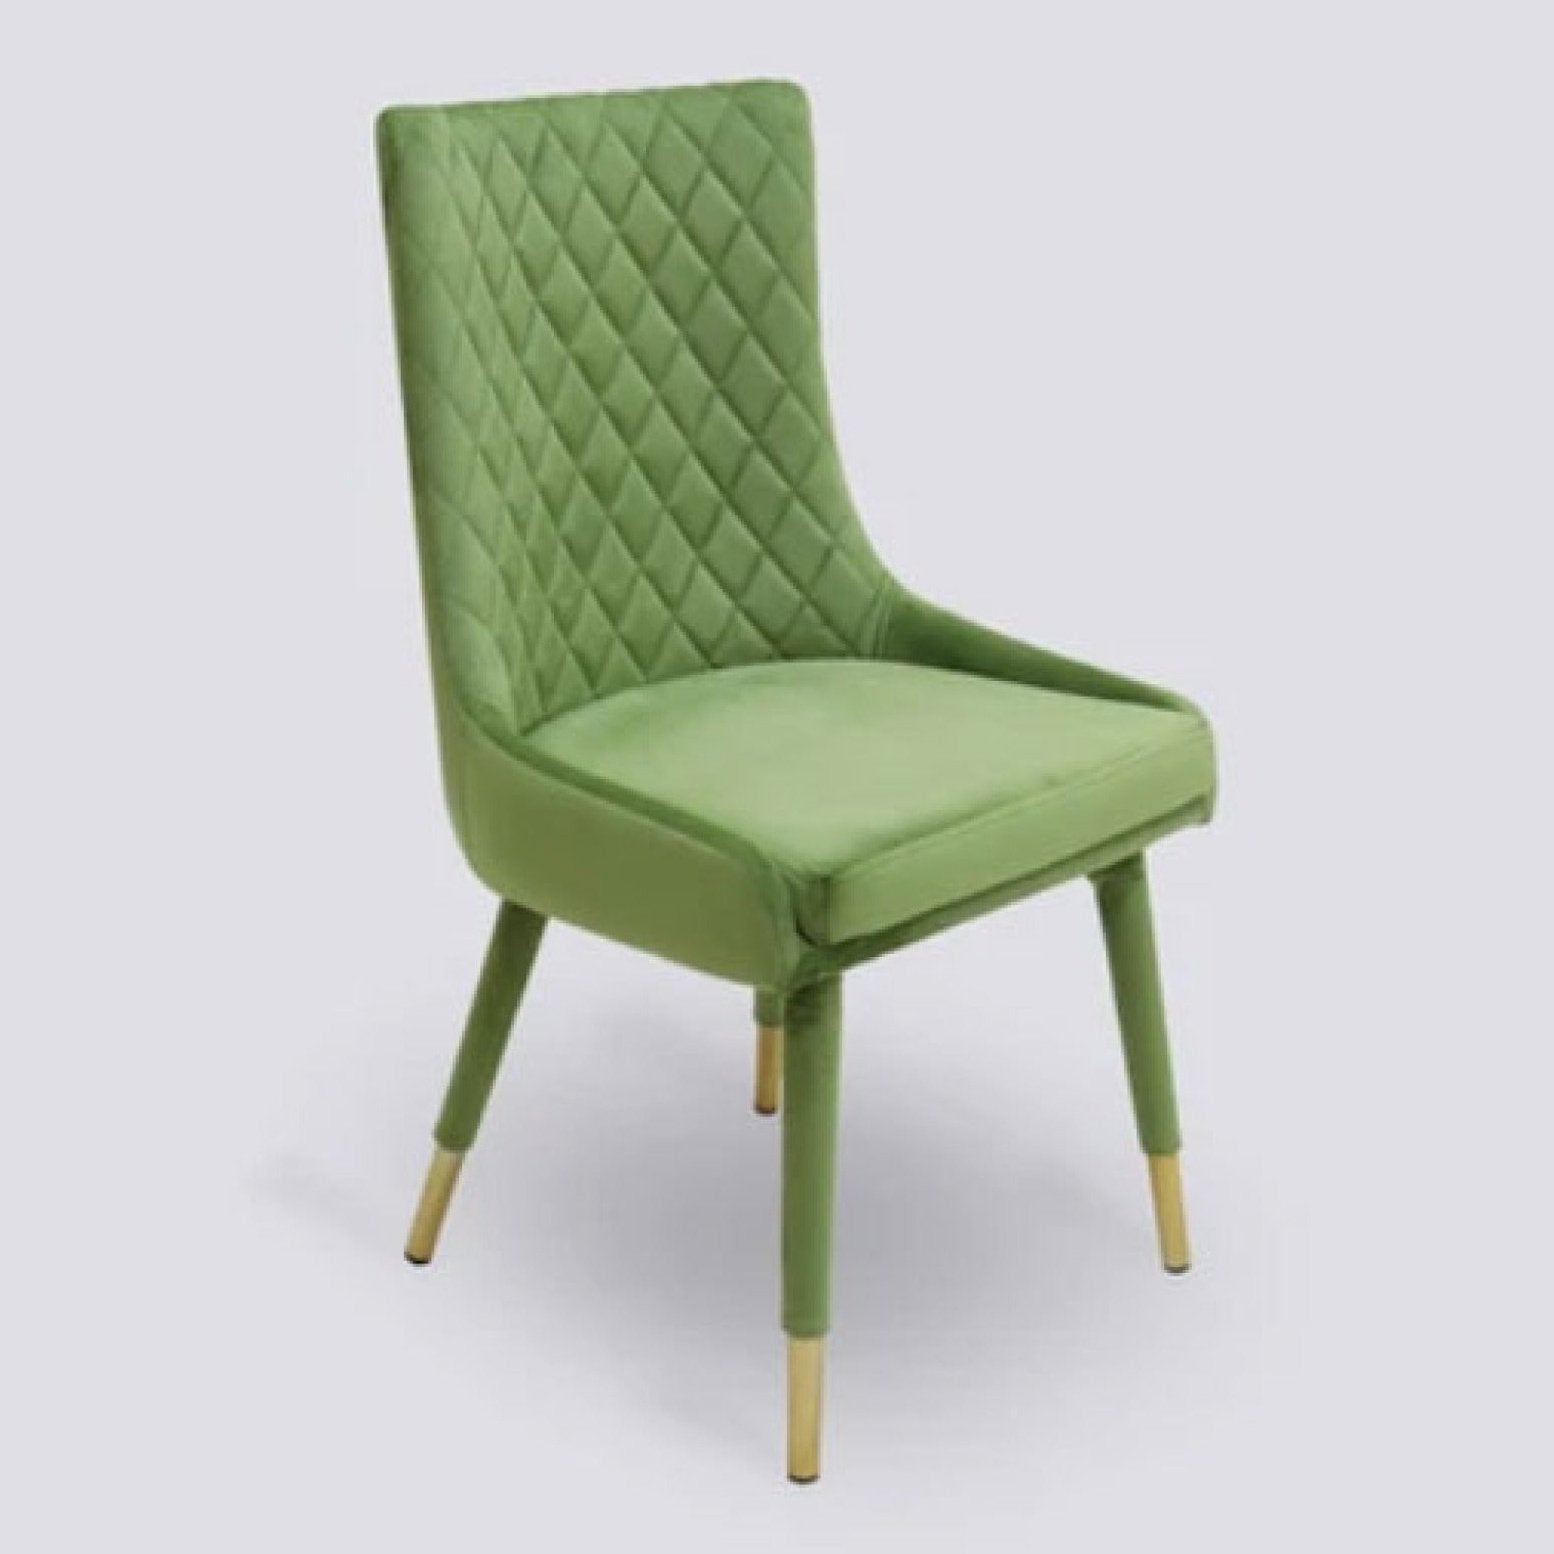 LUX-497 DINING CHAIR Mobel Furniture